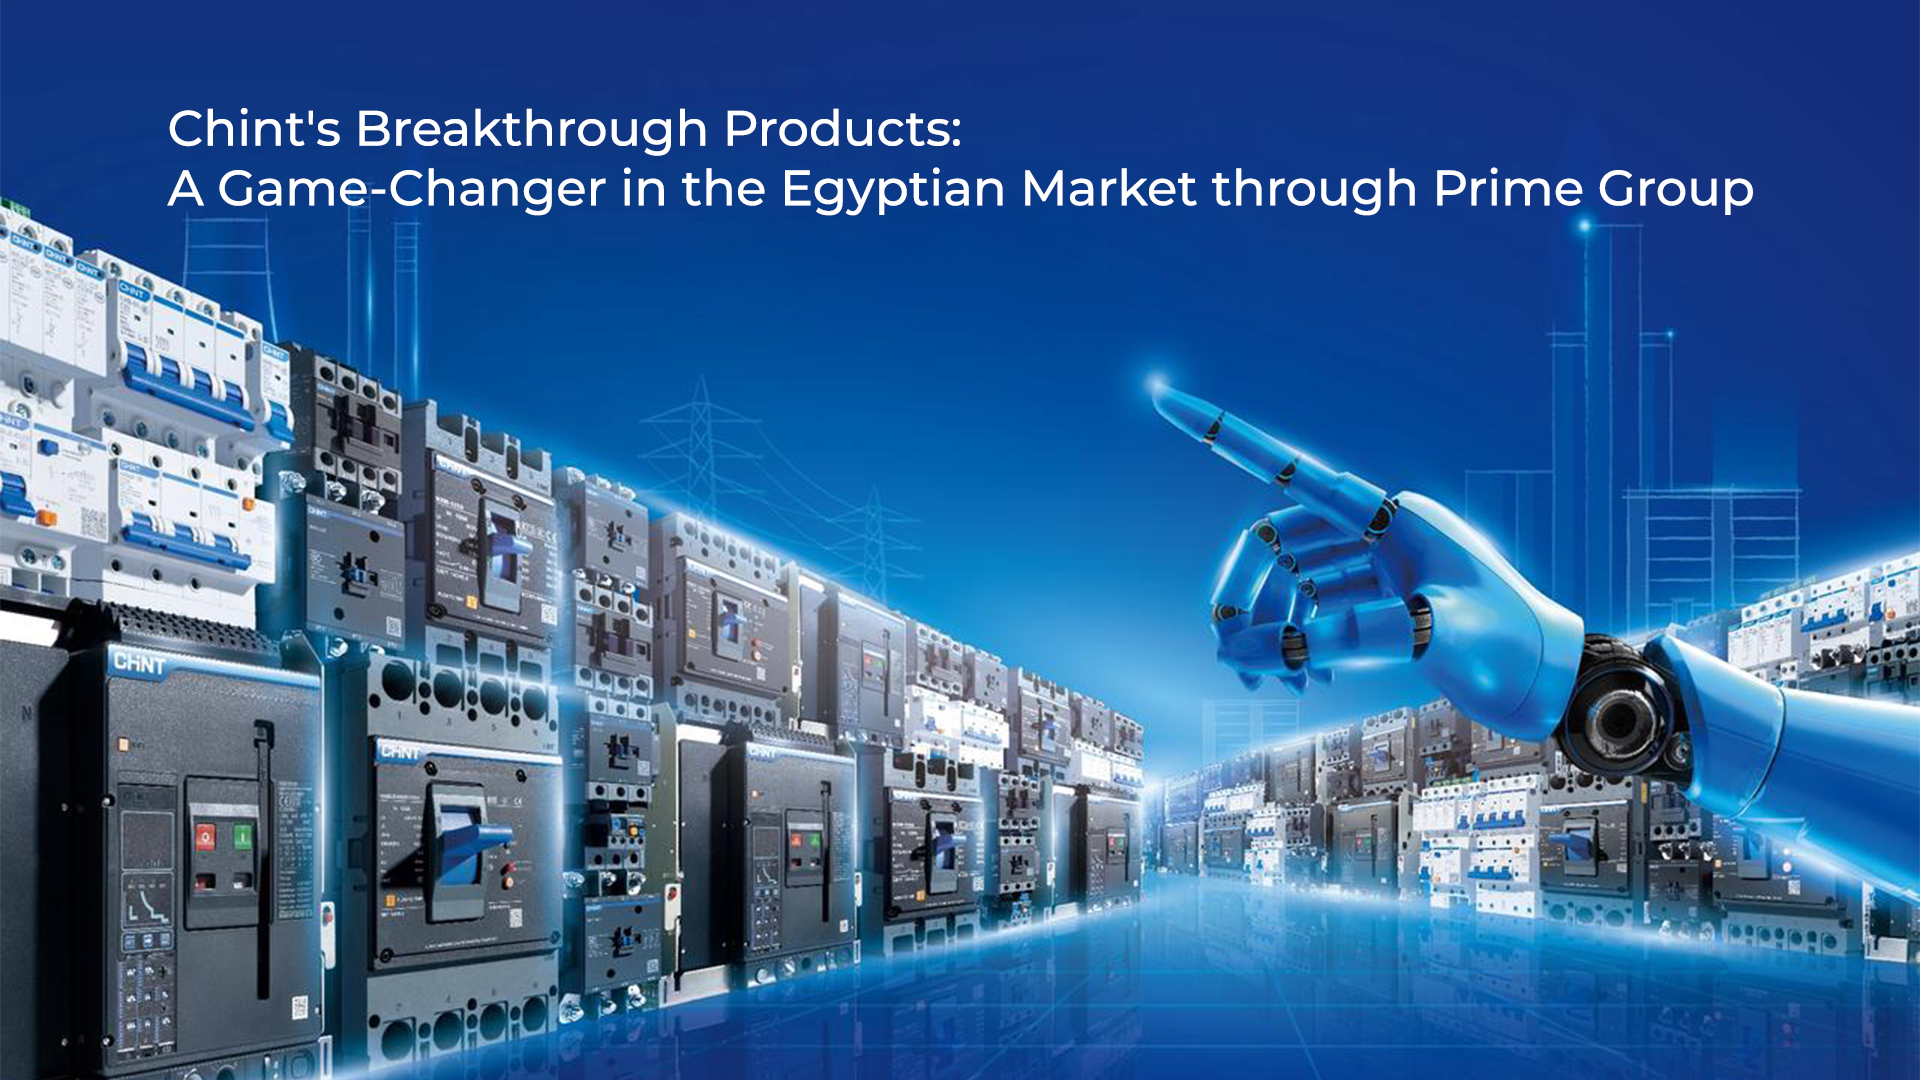 Chint’s Breakthrough Products: A Game-Changer in the Egyptian Market through Prime Group